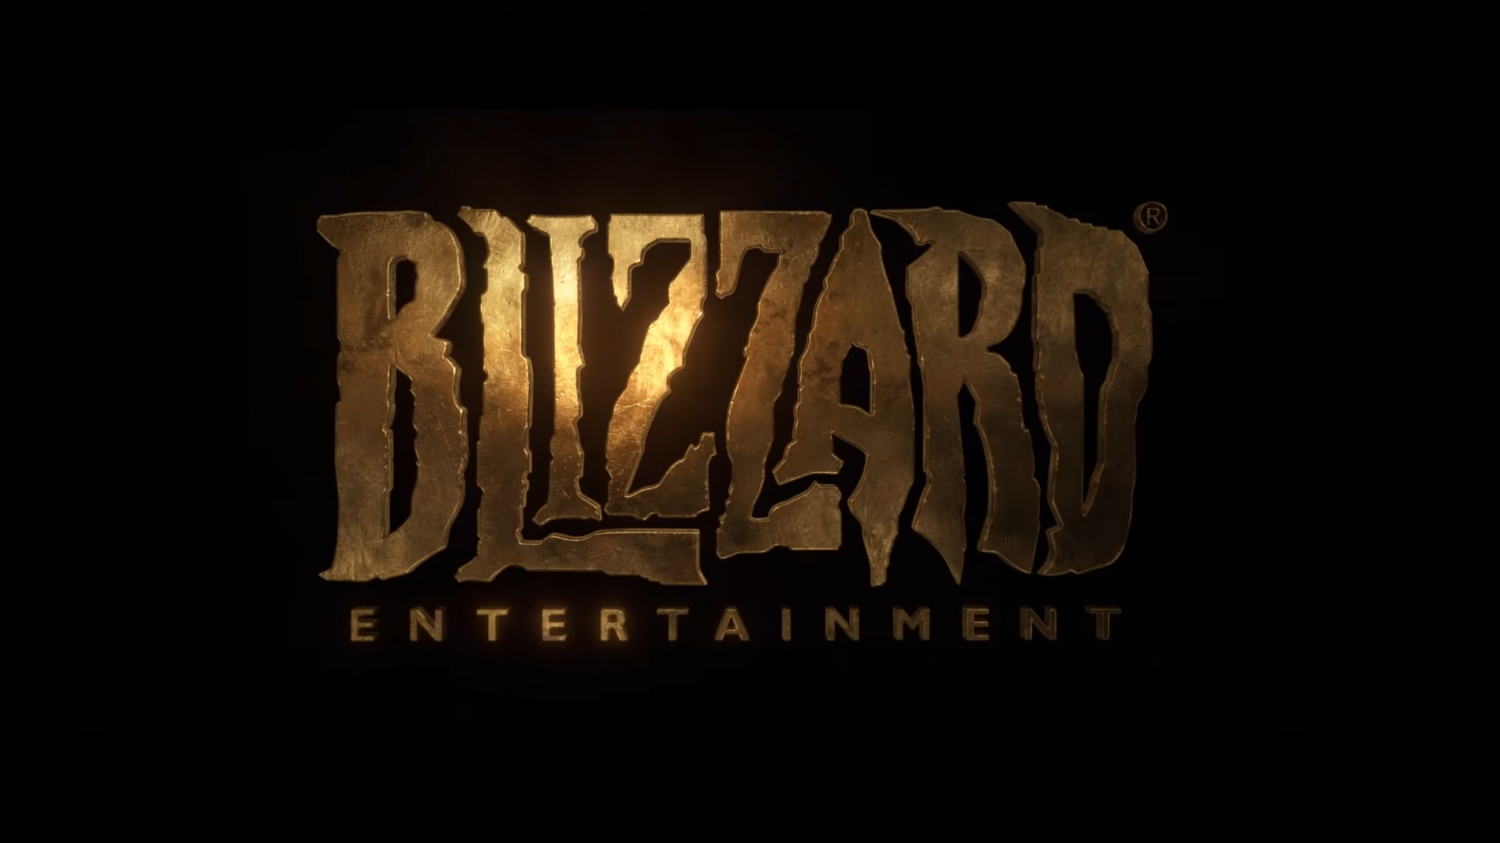 Blizzard Games Coming to Steam - Major Breakthrough in Company's History